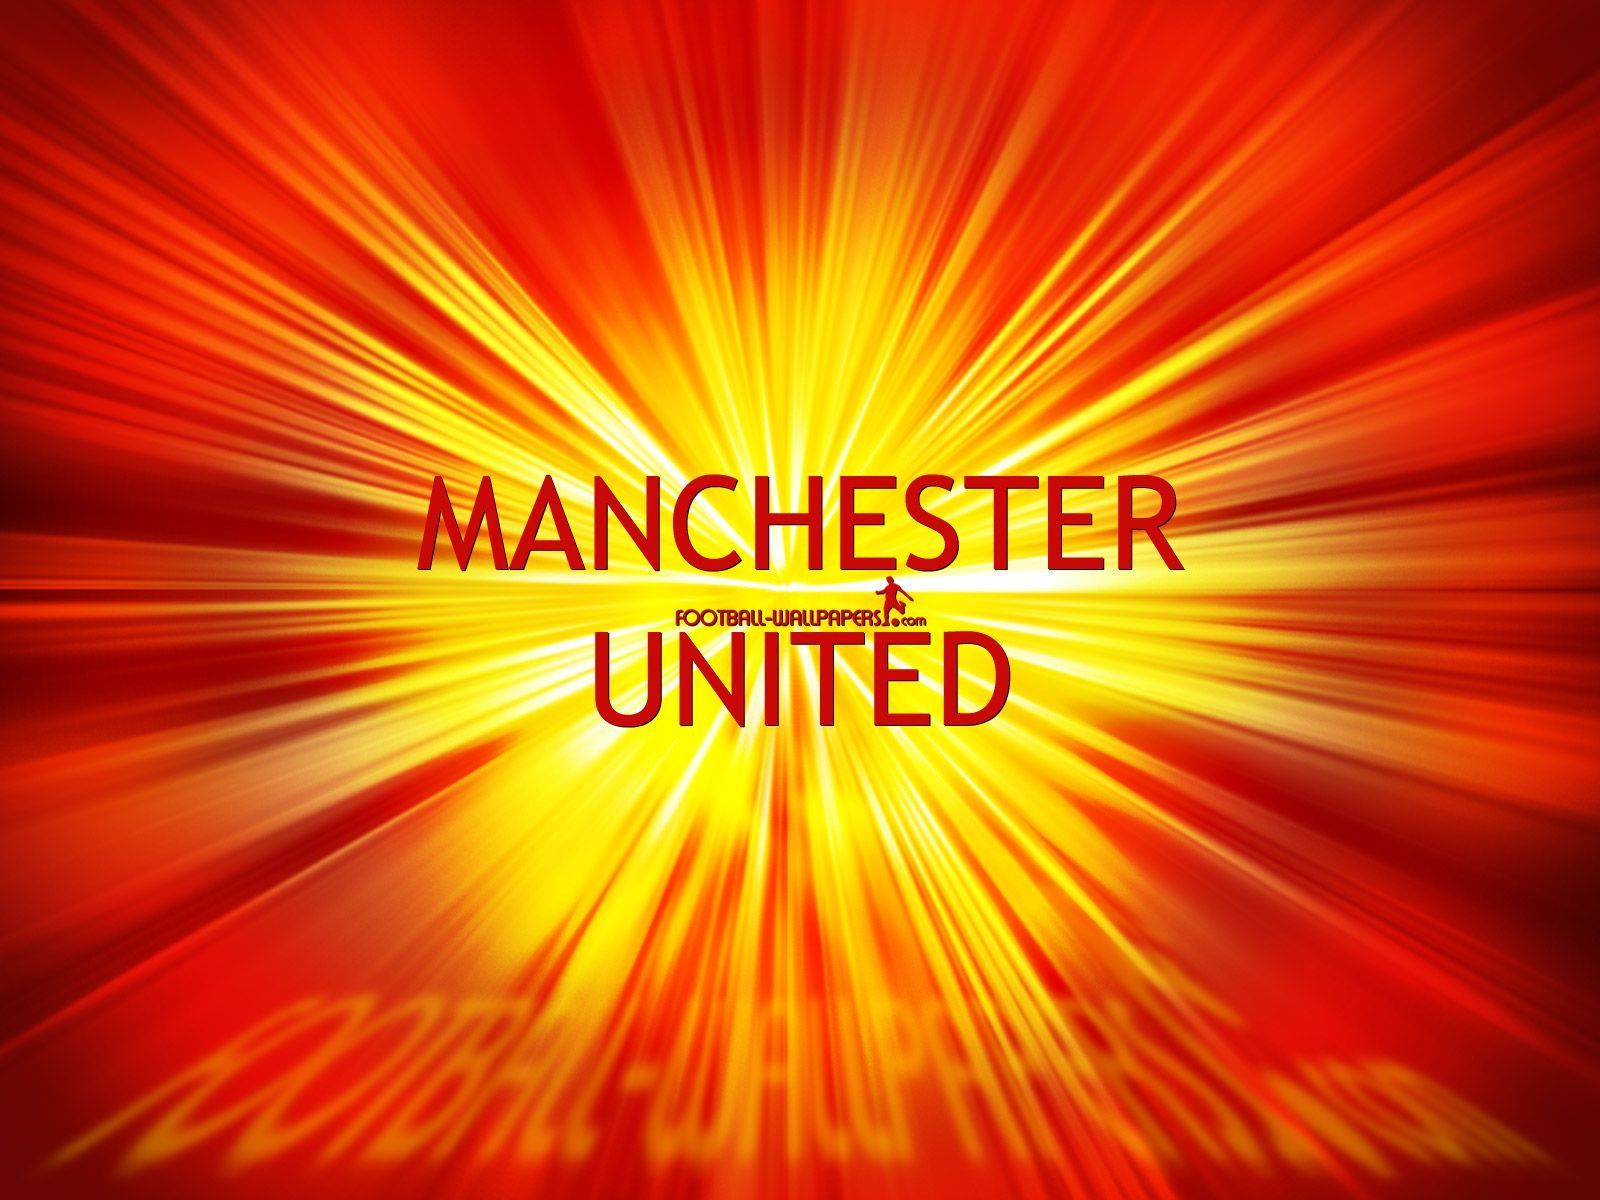 Manchester United Wallpaper #1 | Football Wallpapers and Videos